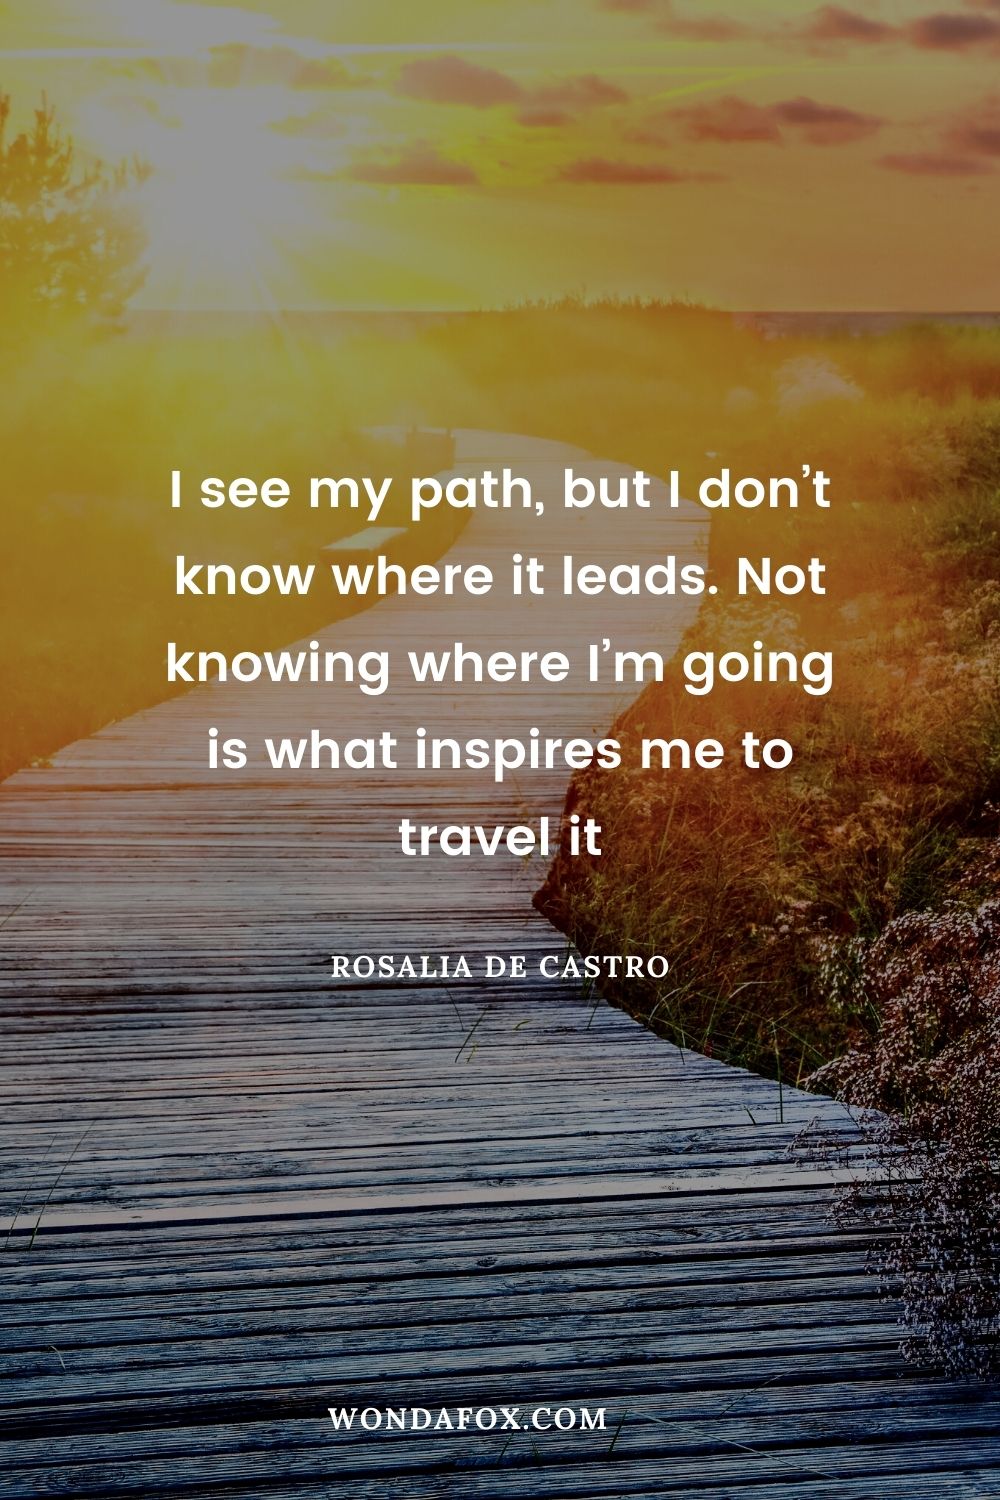 I see my path, but I don’t know where it leads. Not knowing where I’m going is what inspires me to travel it